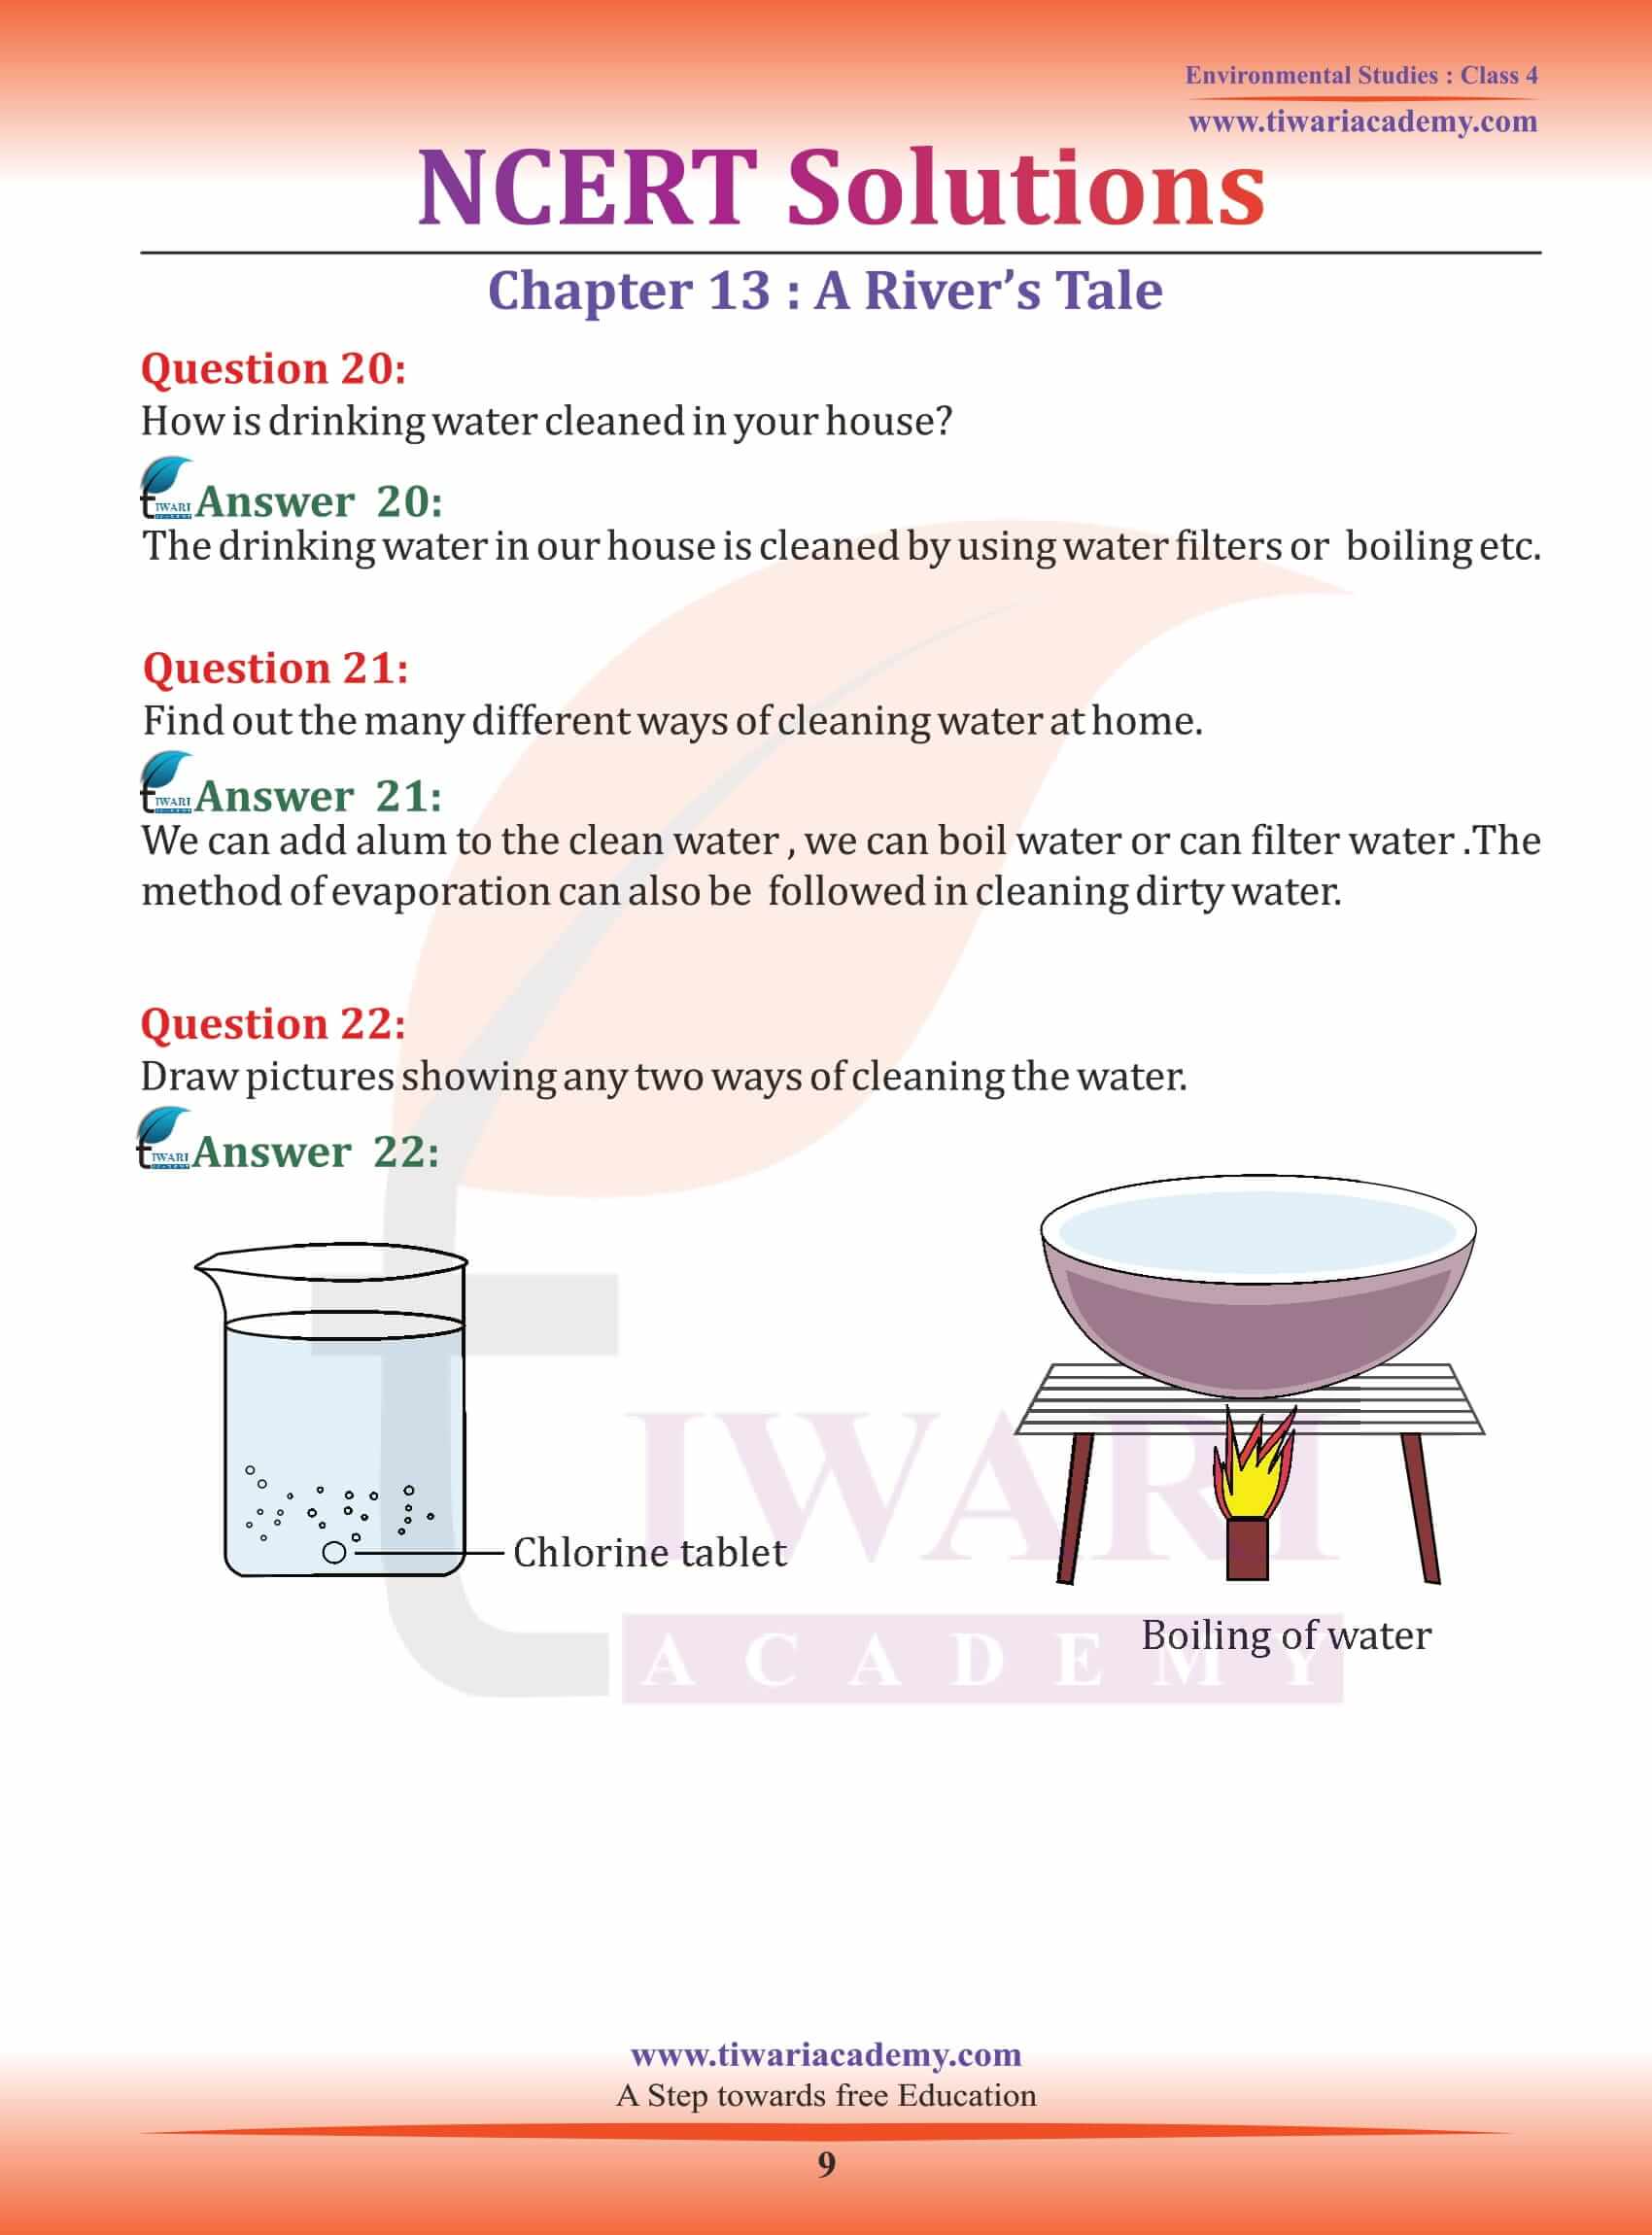 NCERT Solutions for Class 4 EVS Chapter 13 QA